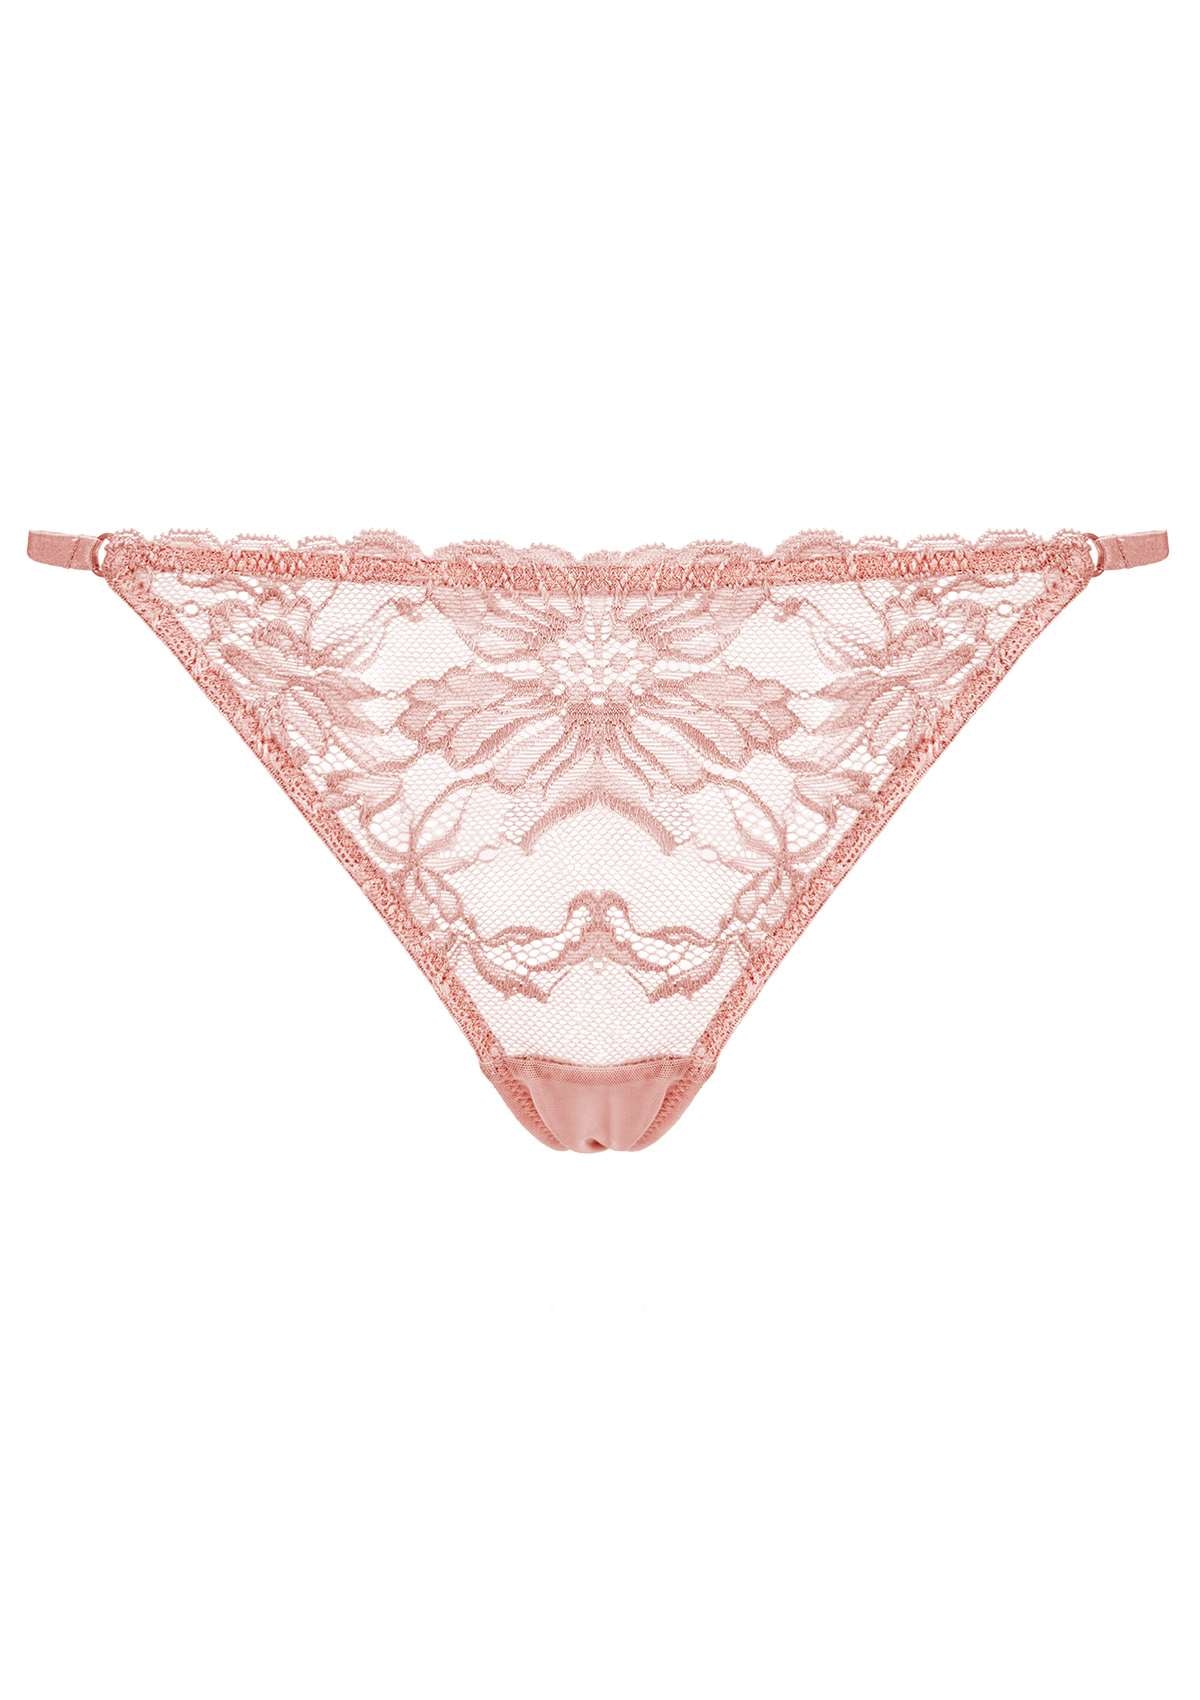 HSIA Pretty In Petals: 3-Pack Of Sexy Floral Chic Lace String Thongs - S / Light Coral+Dusty Peach+Pewter Blue